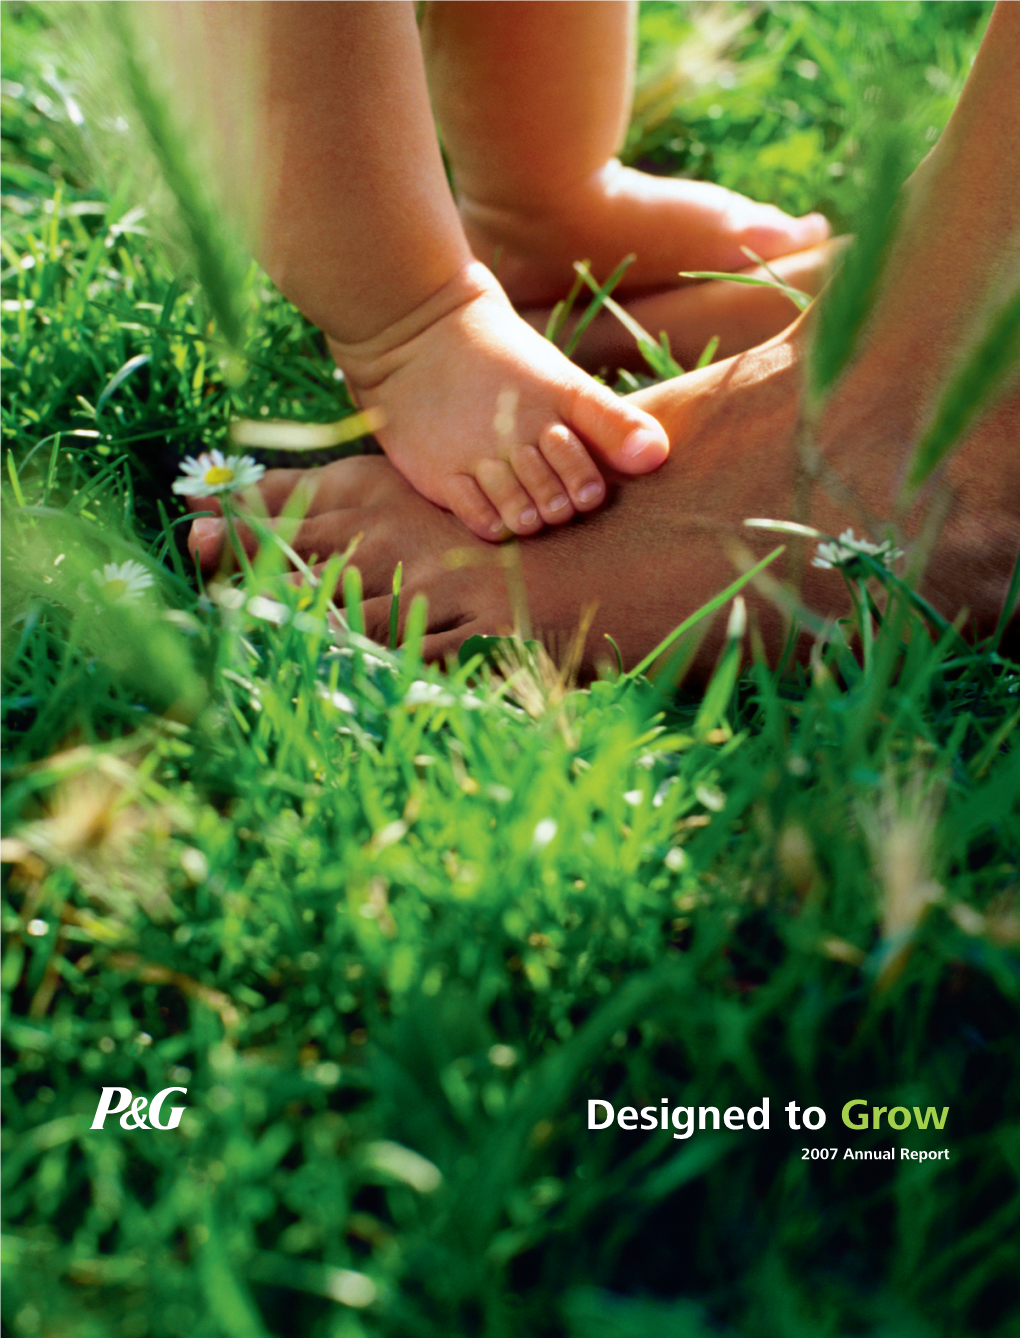 Designed to Grow 2007 Annual Report Contents